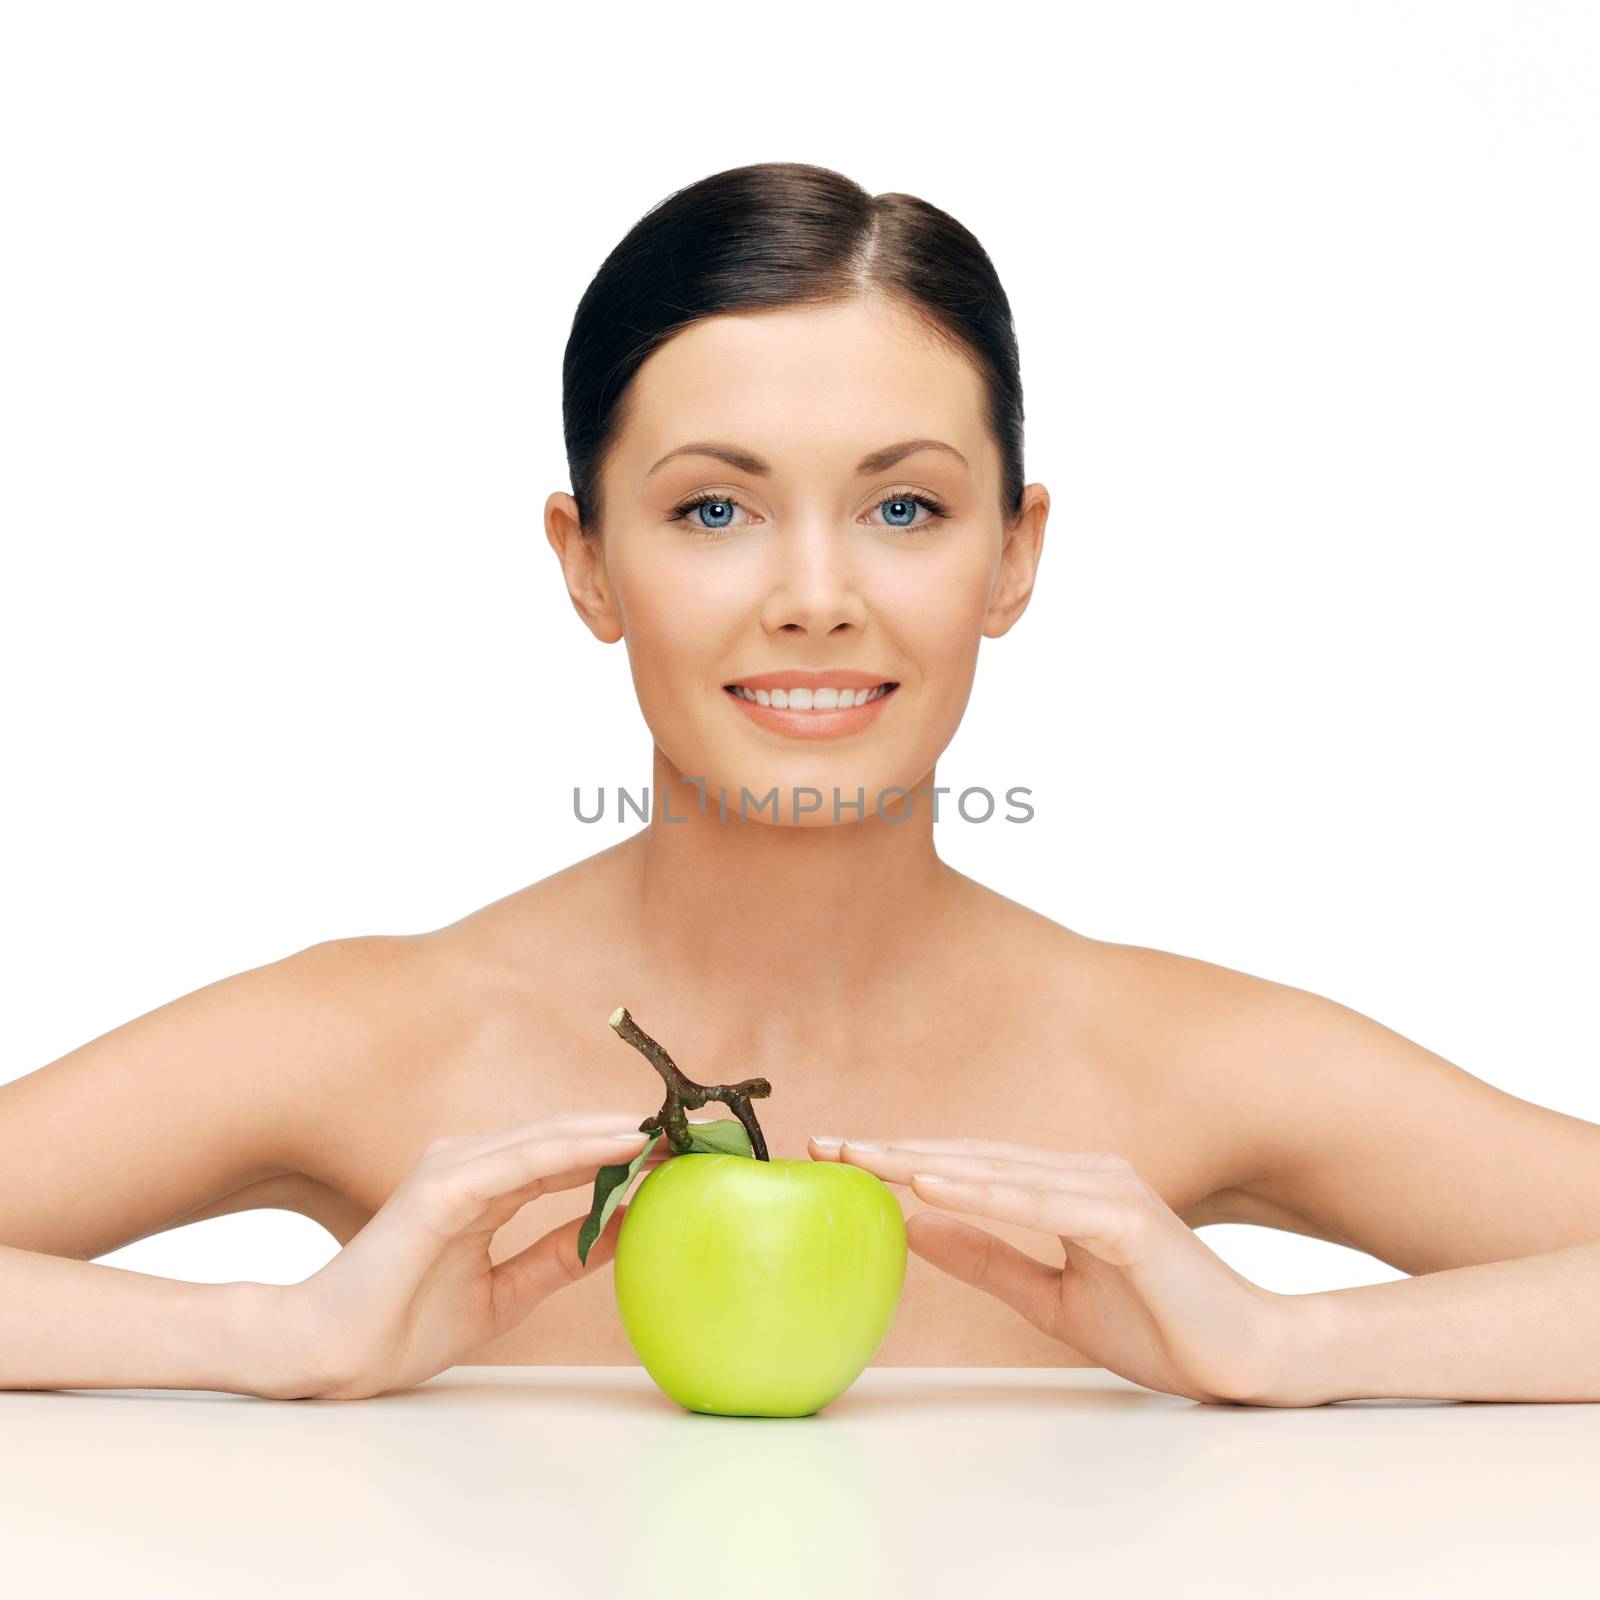 beauty and healthy eating concept - beautiful woman with green apple